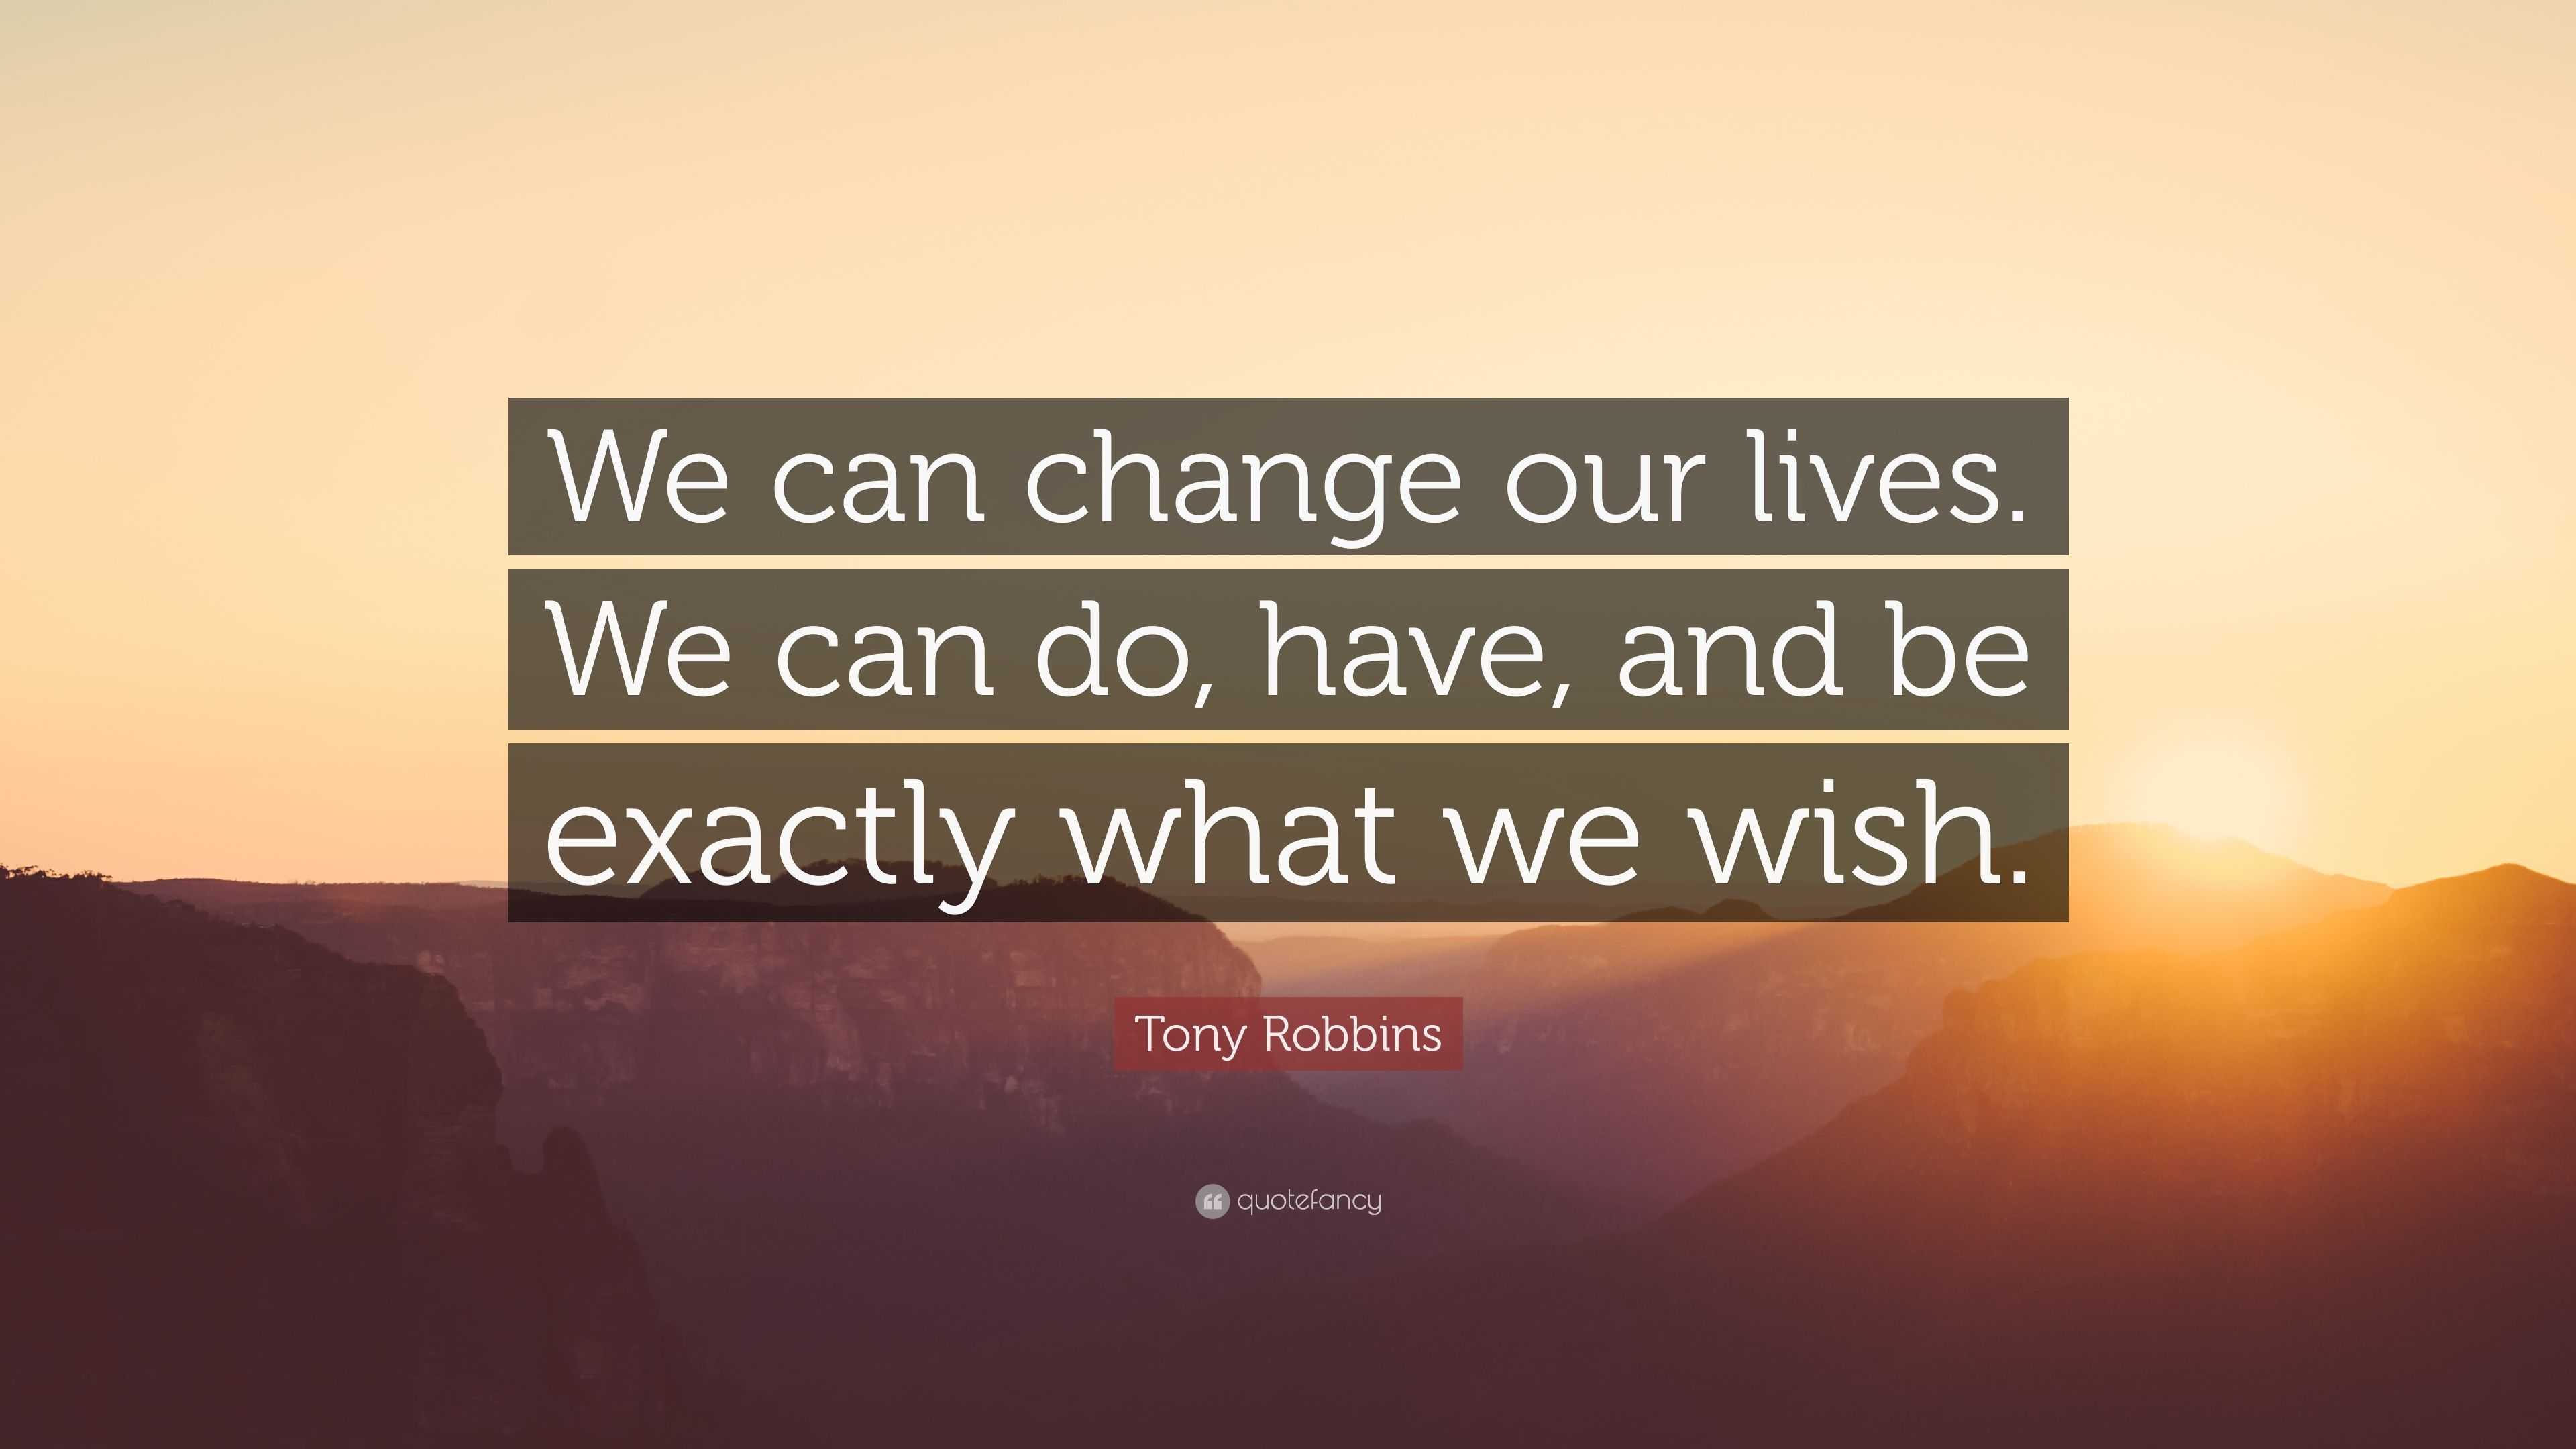 Tony Robbins Quote: “We can change our lives. We can do, have, and be ...